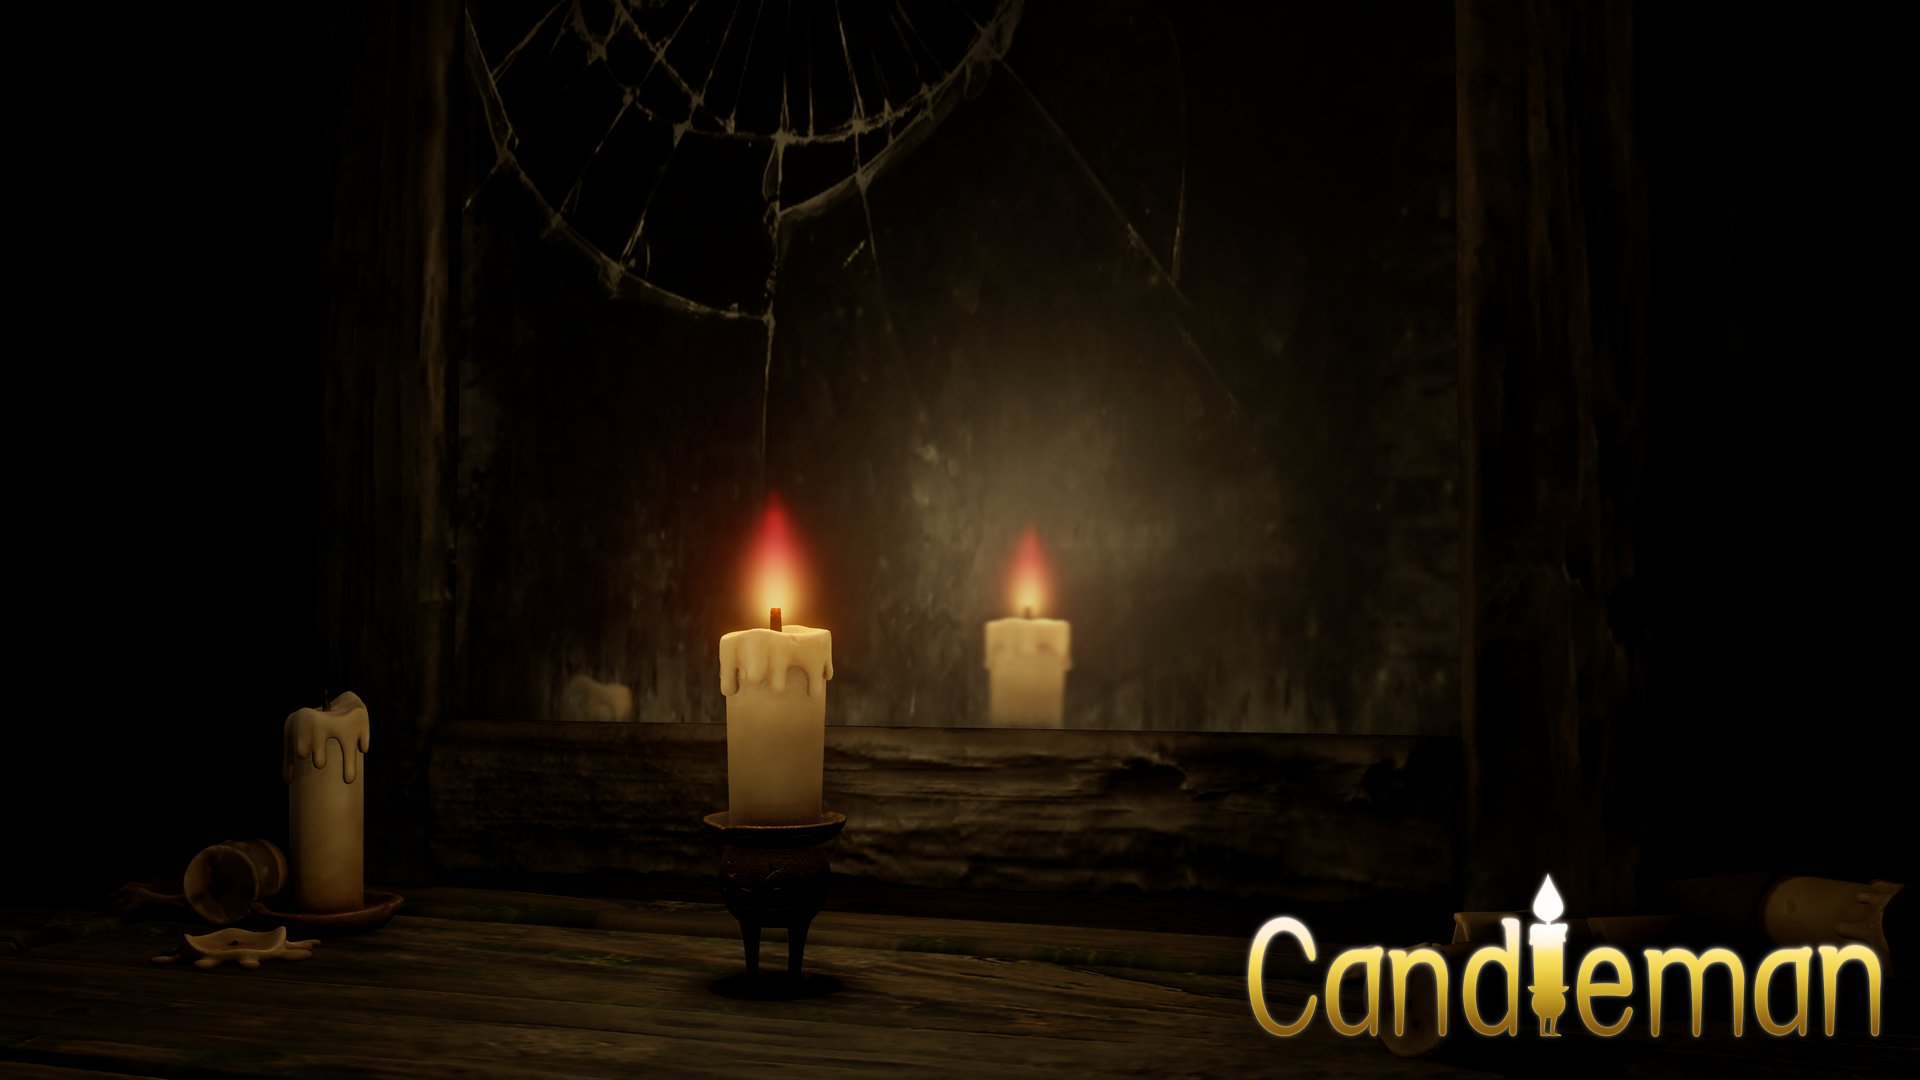 Candleman Available Exclusively on Xbox One February 1